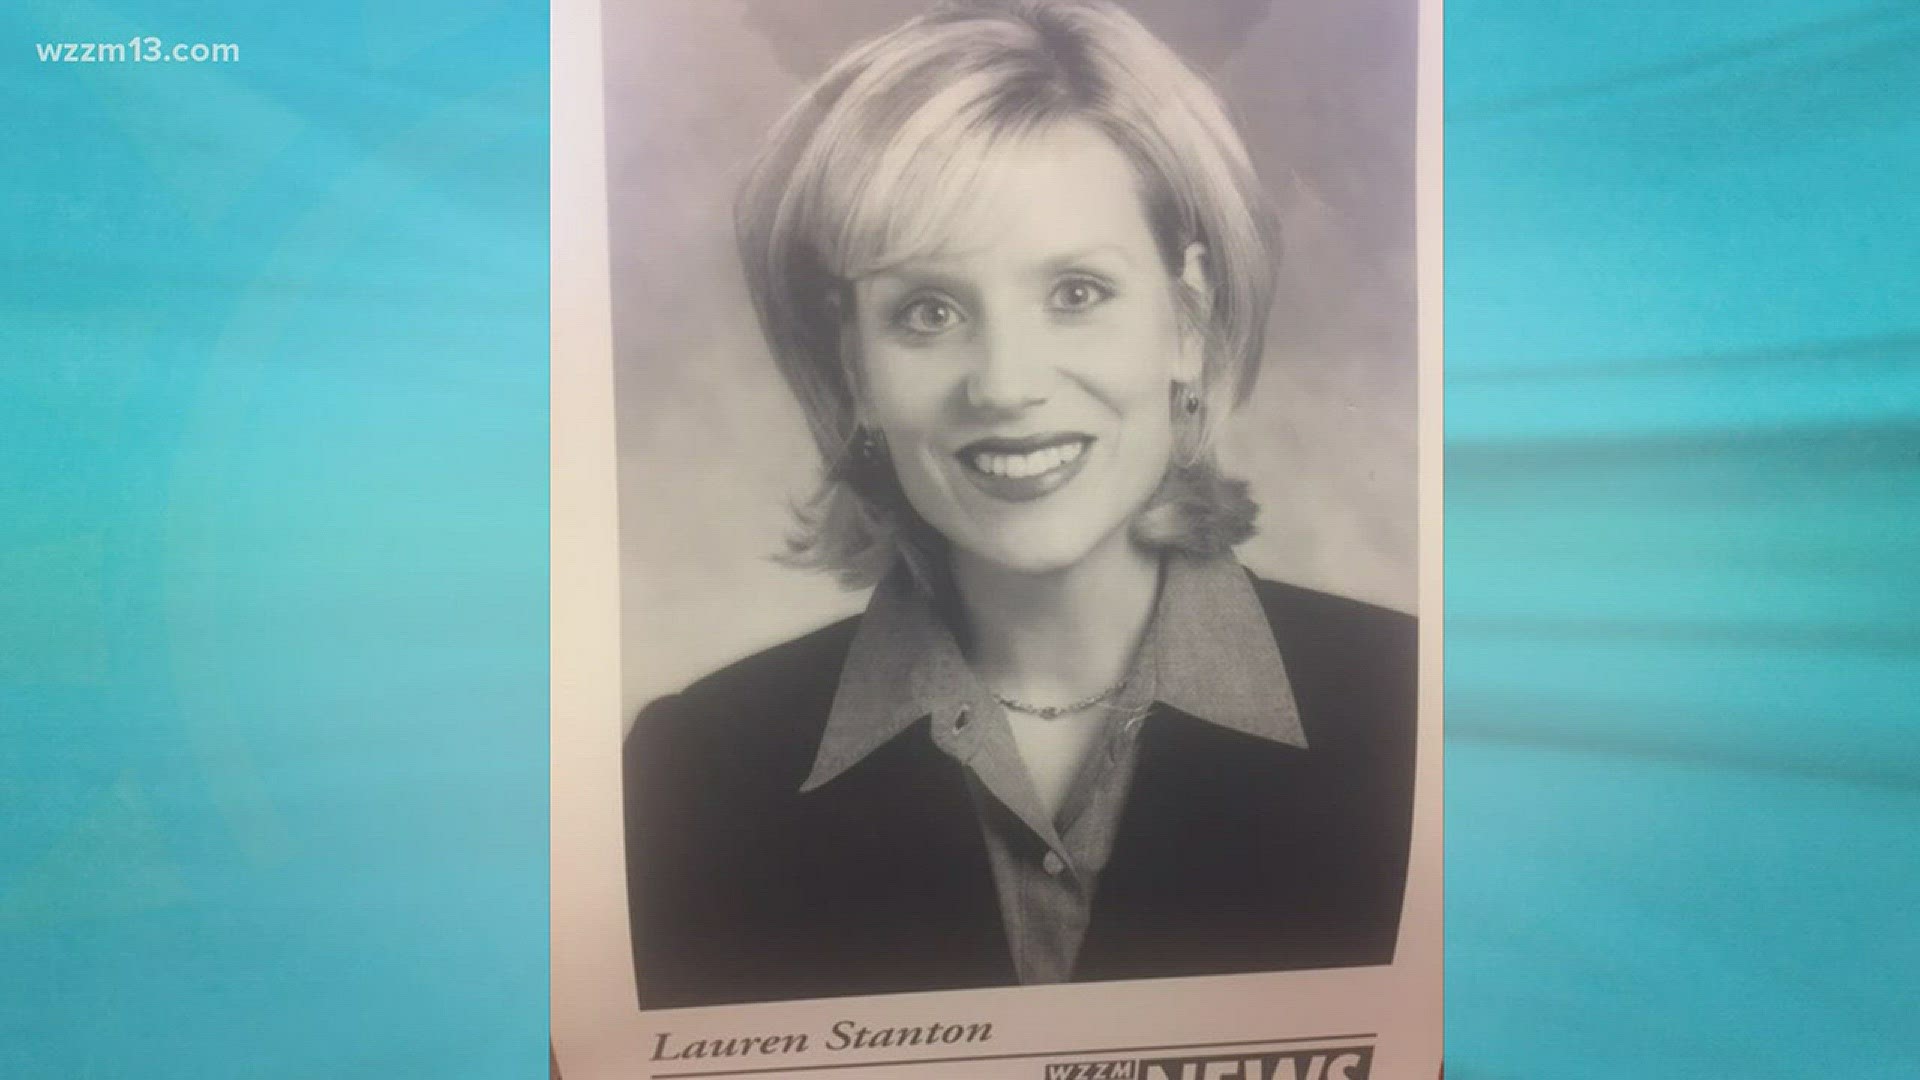 Lauren Stanton announces she's leaving WZZM 13 after 18 years